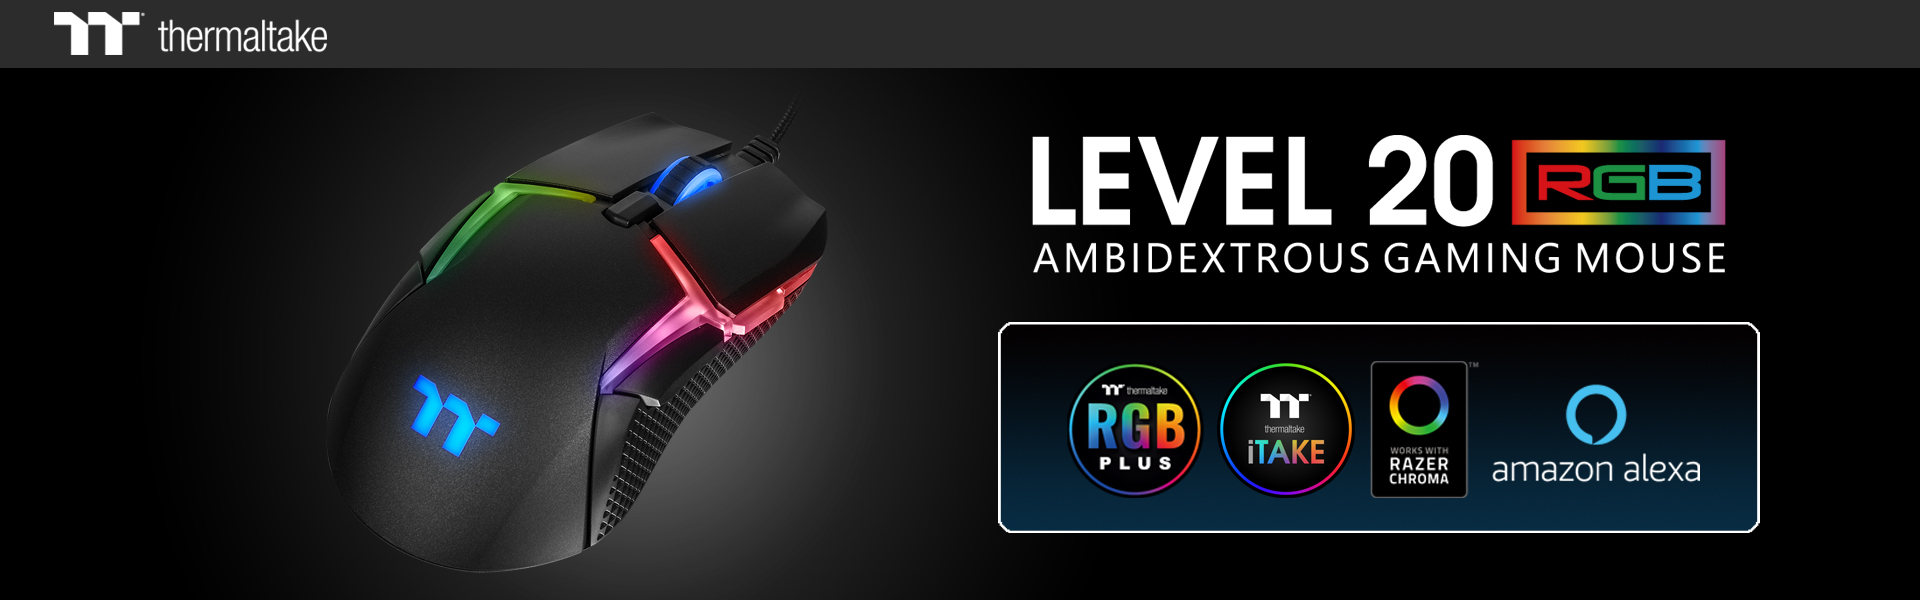 Thermaltake Launches its first Level 20 Gaming Mouse 1